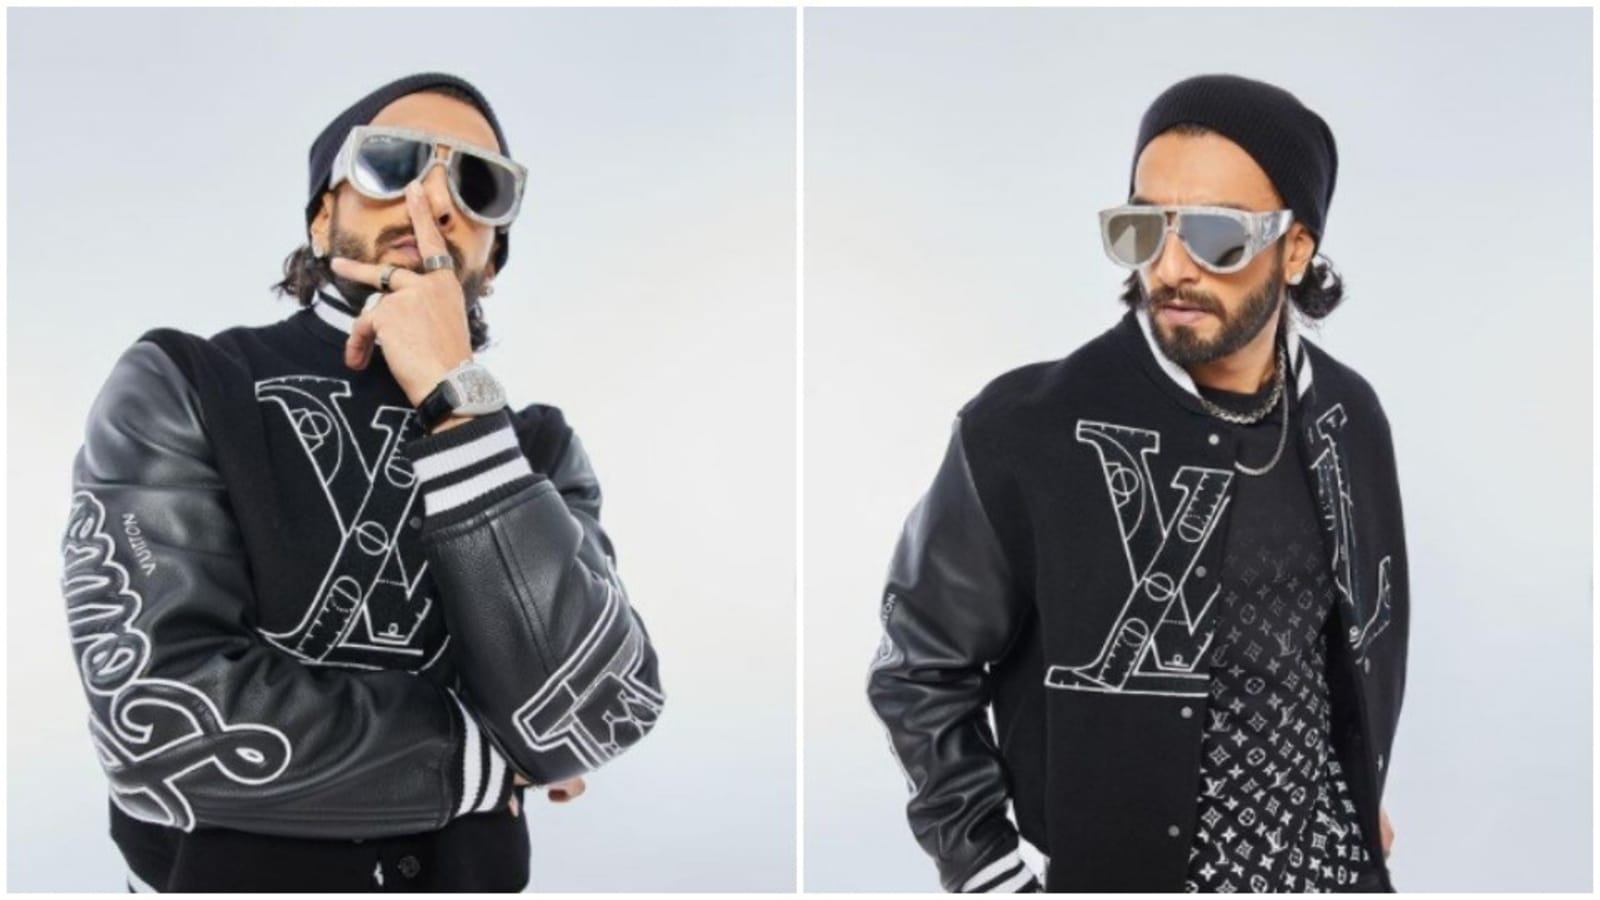 6 times Ranveer Singh looked dapper in his fashion outings